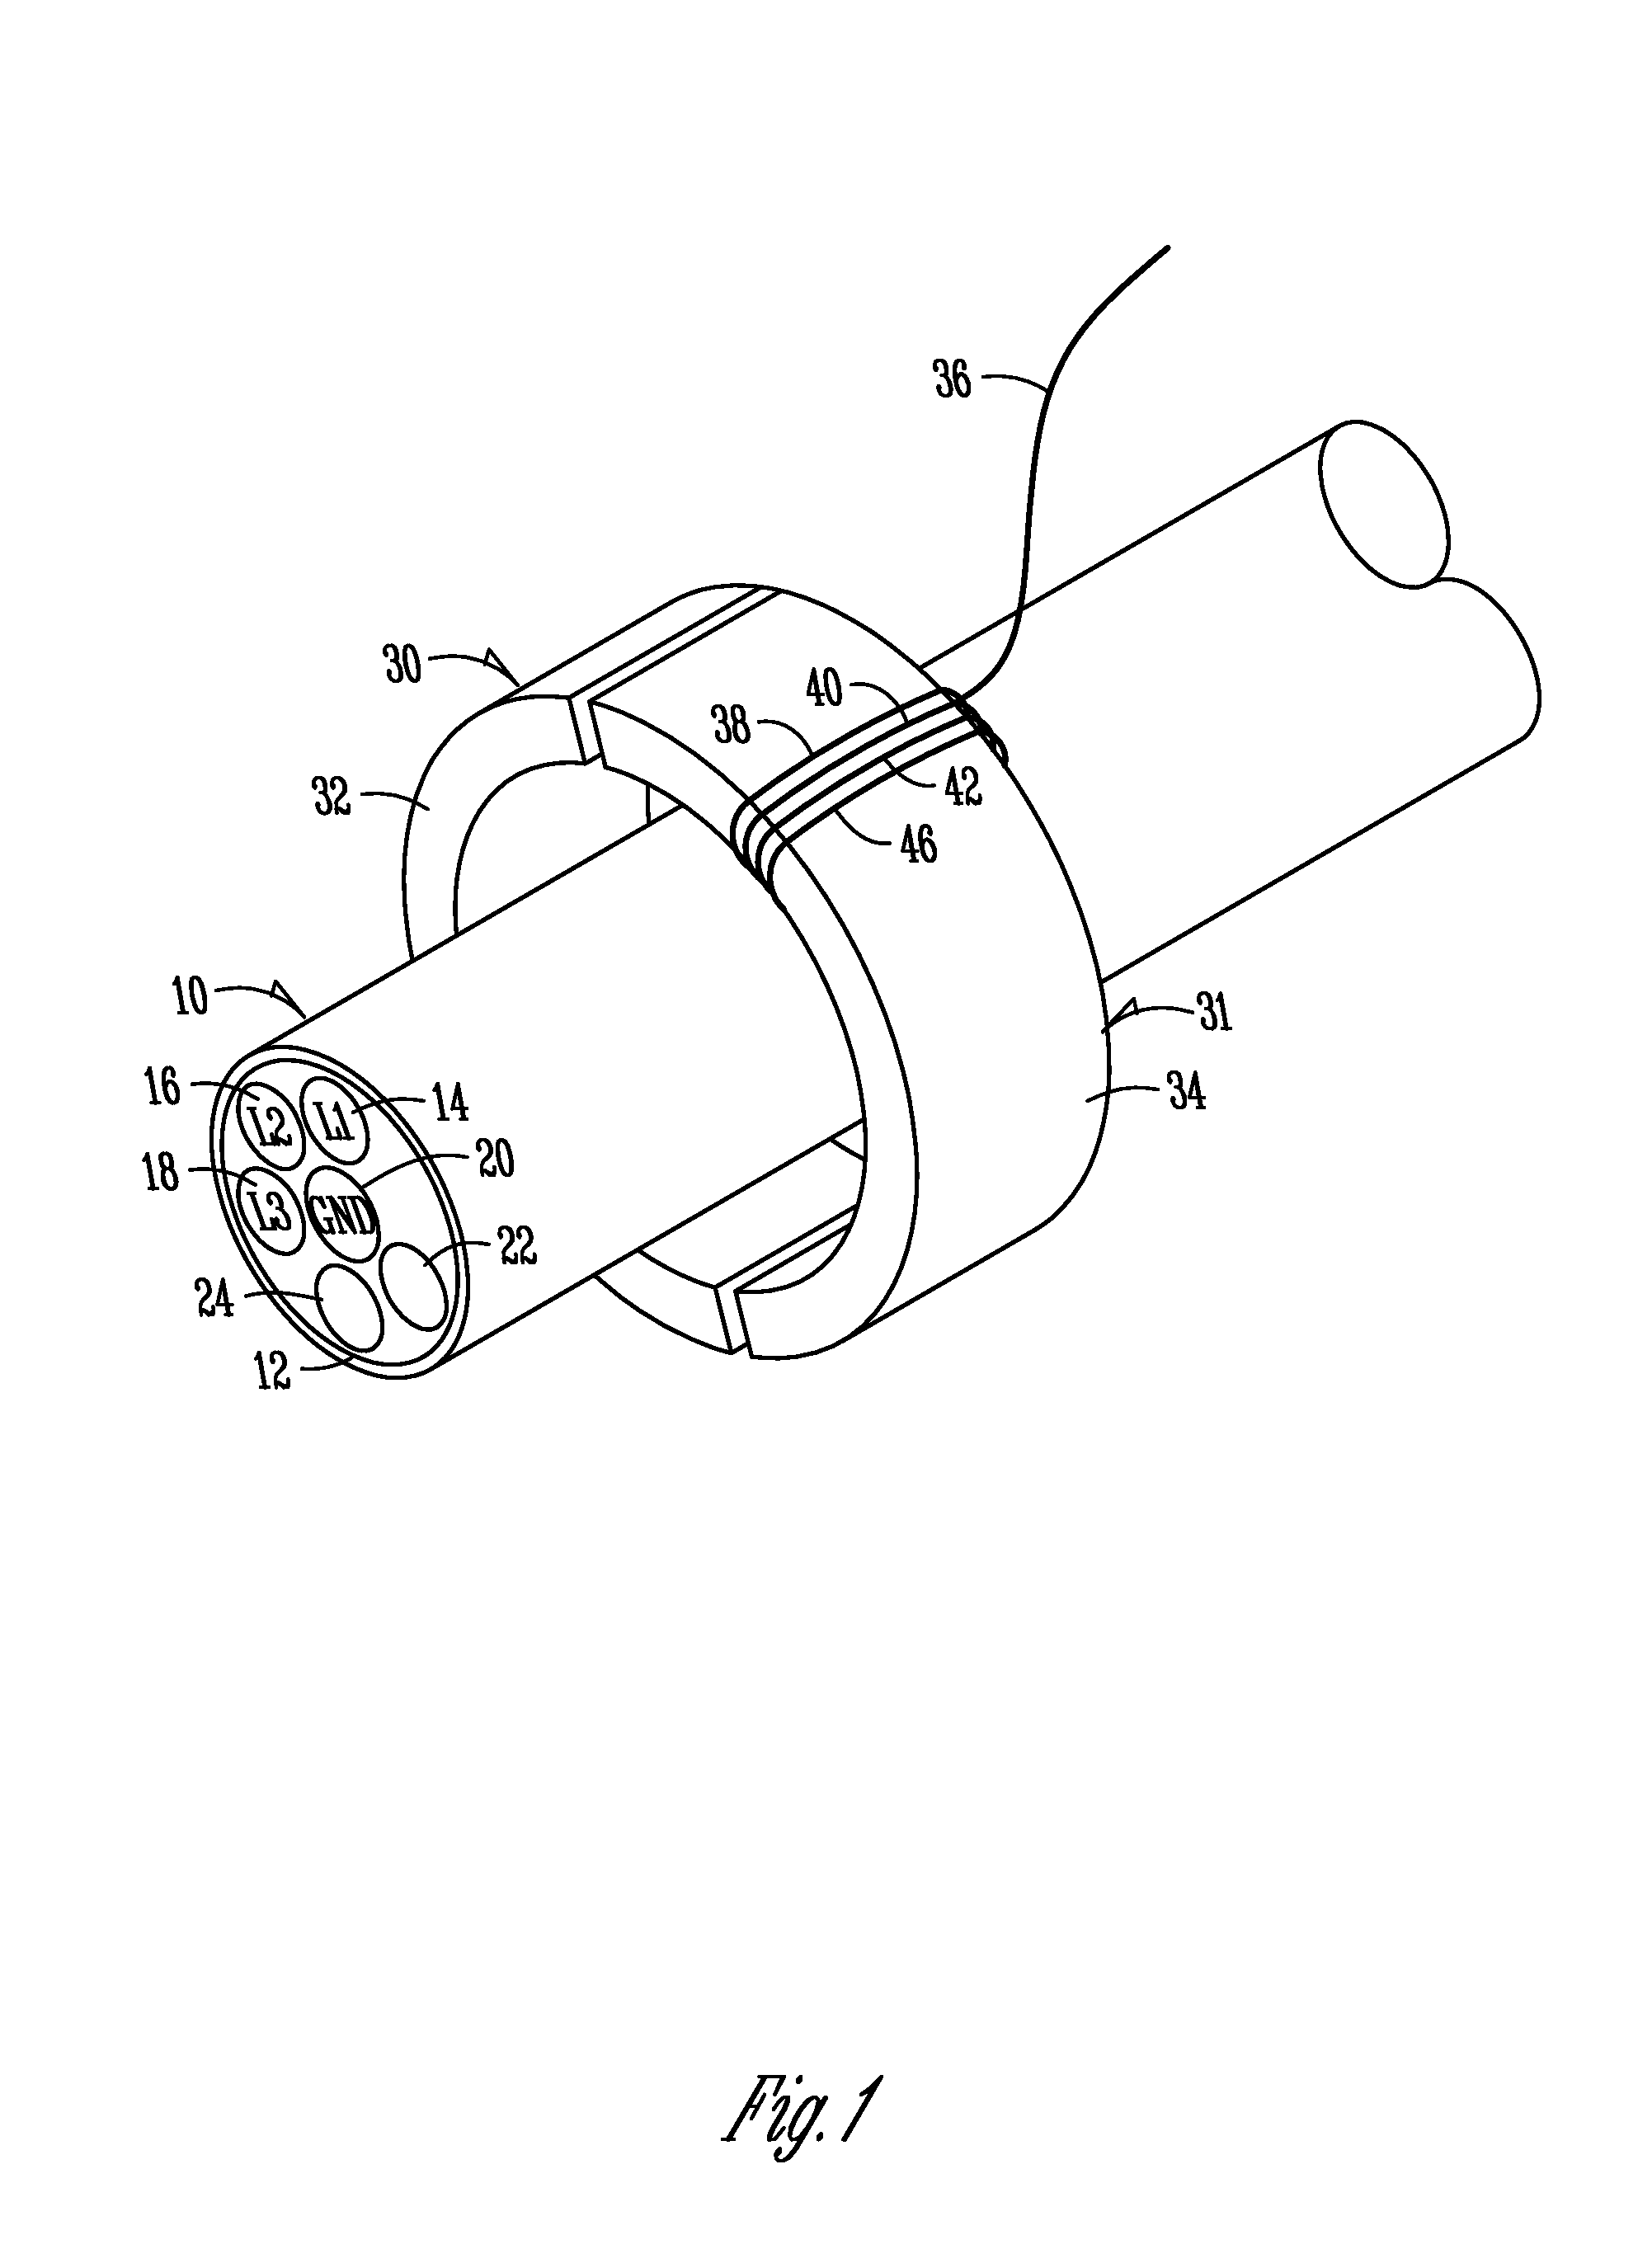 Communication using multiple conductor cable